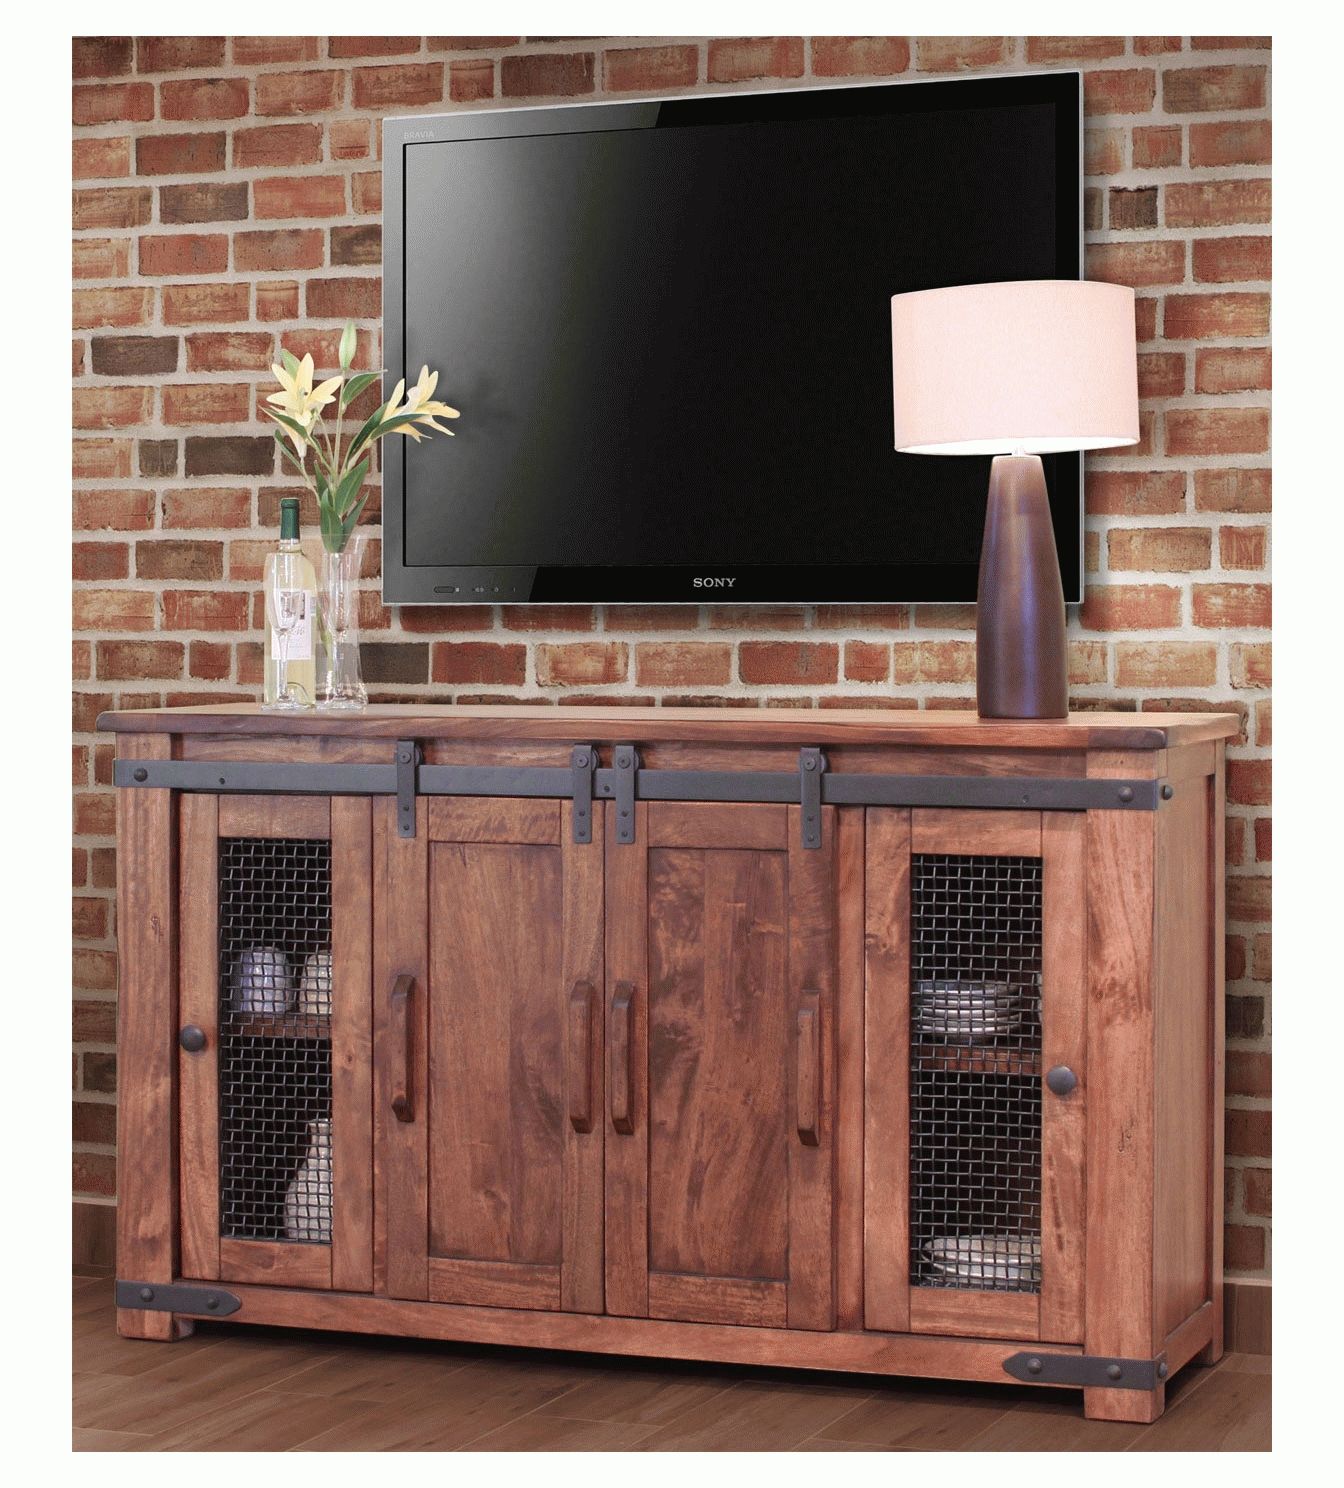 Rustic Barn Door Tv Stand, Barn Door Tv Stand, Barn Door Tv Console Pertaining To Rustic Tv Stands (View 1 of 15)